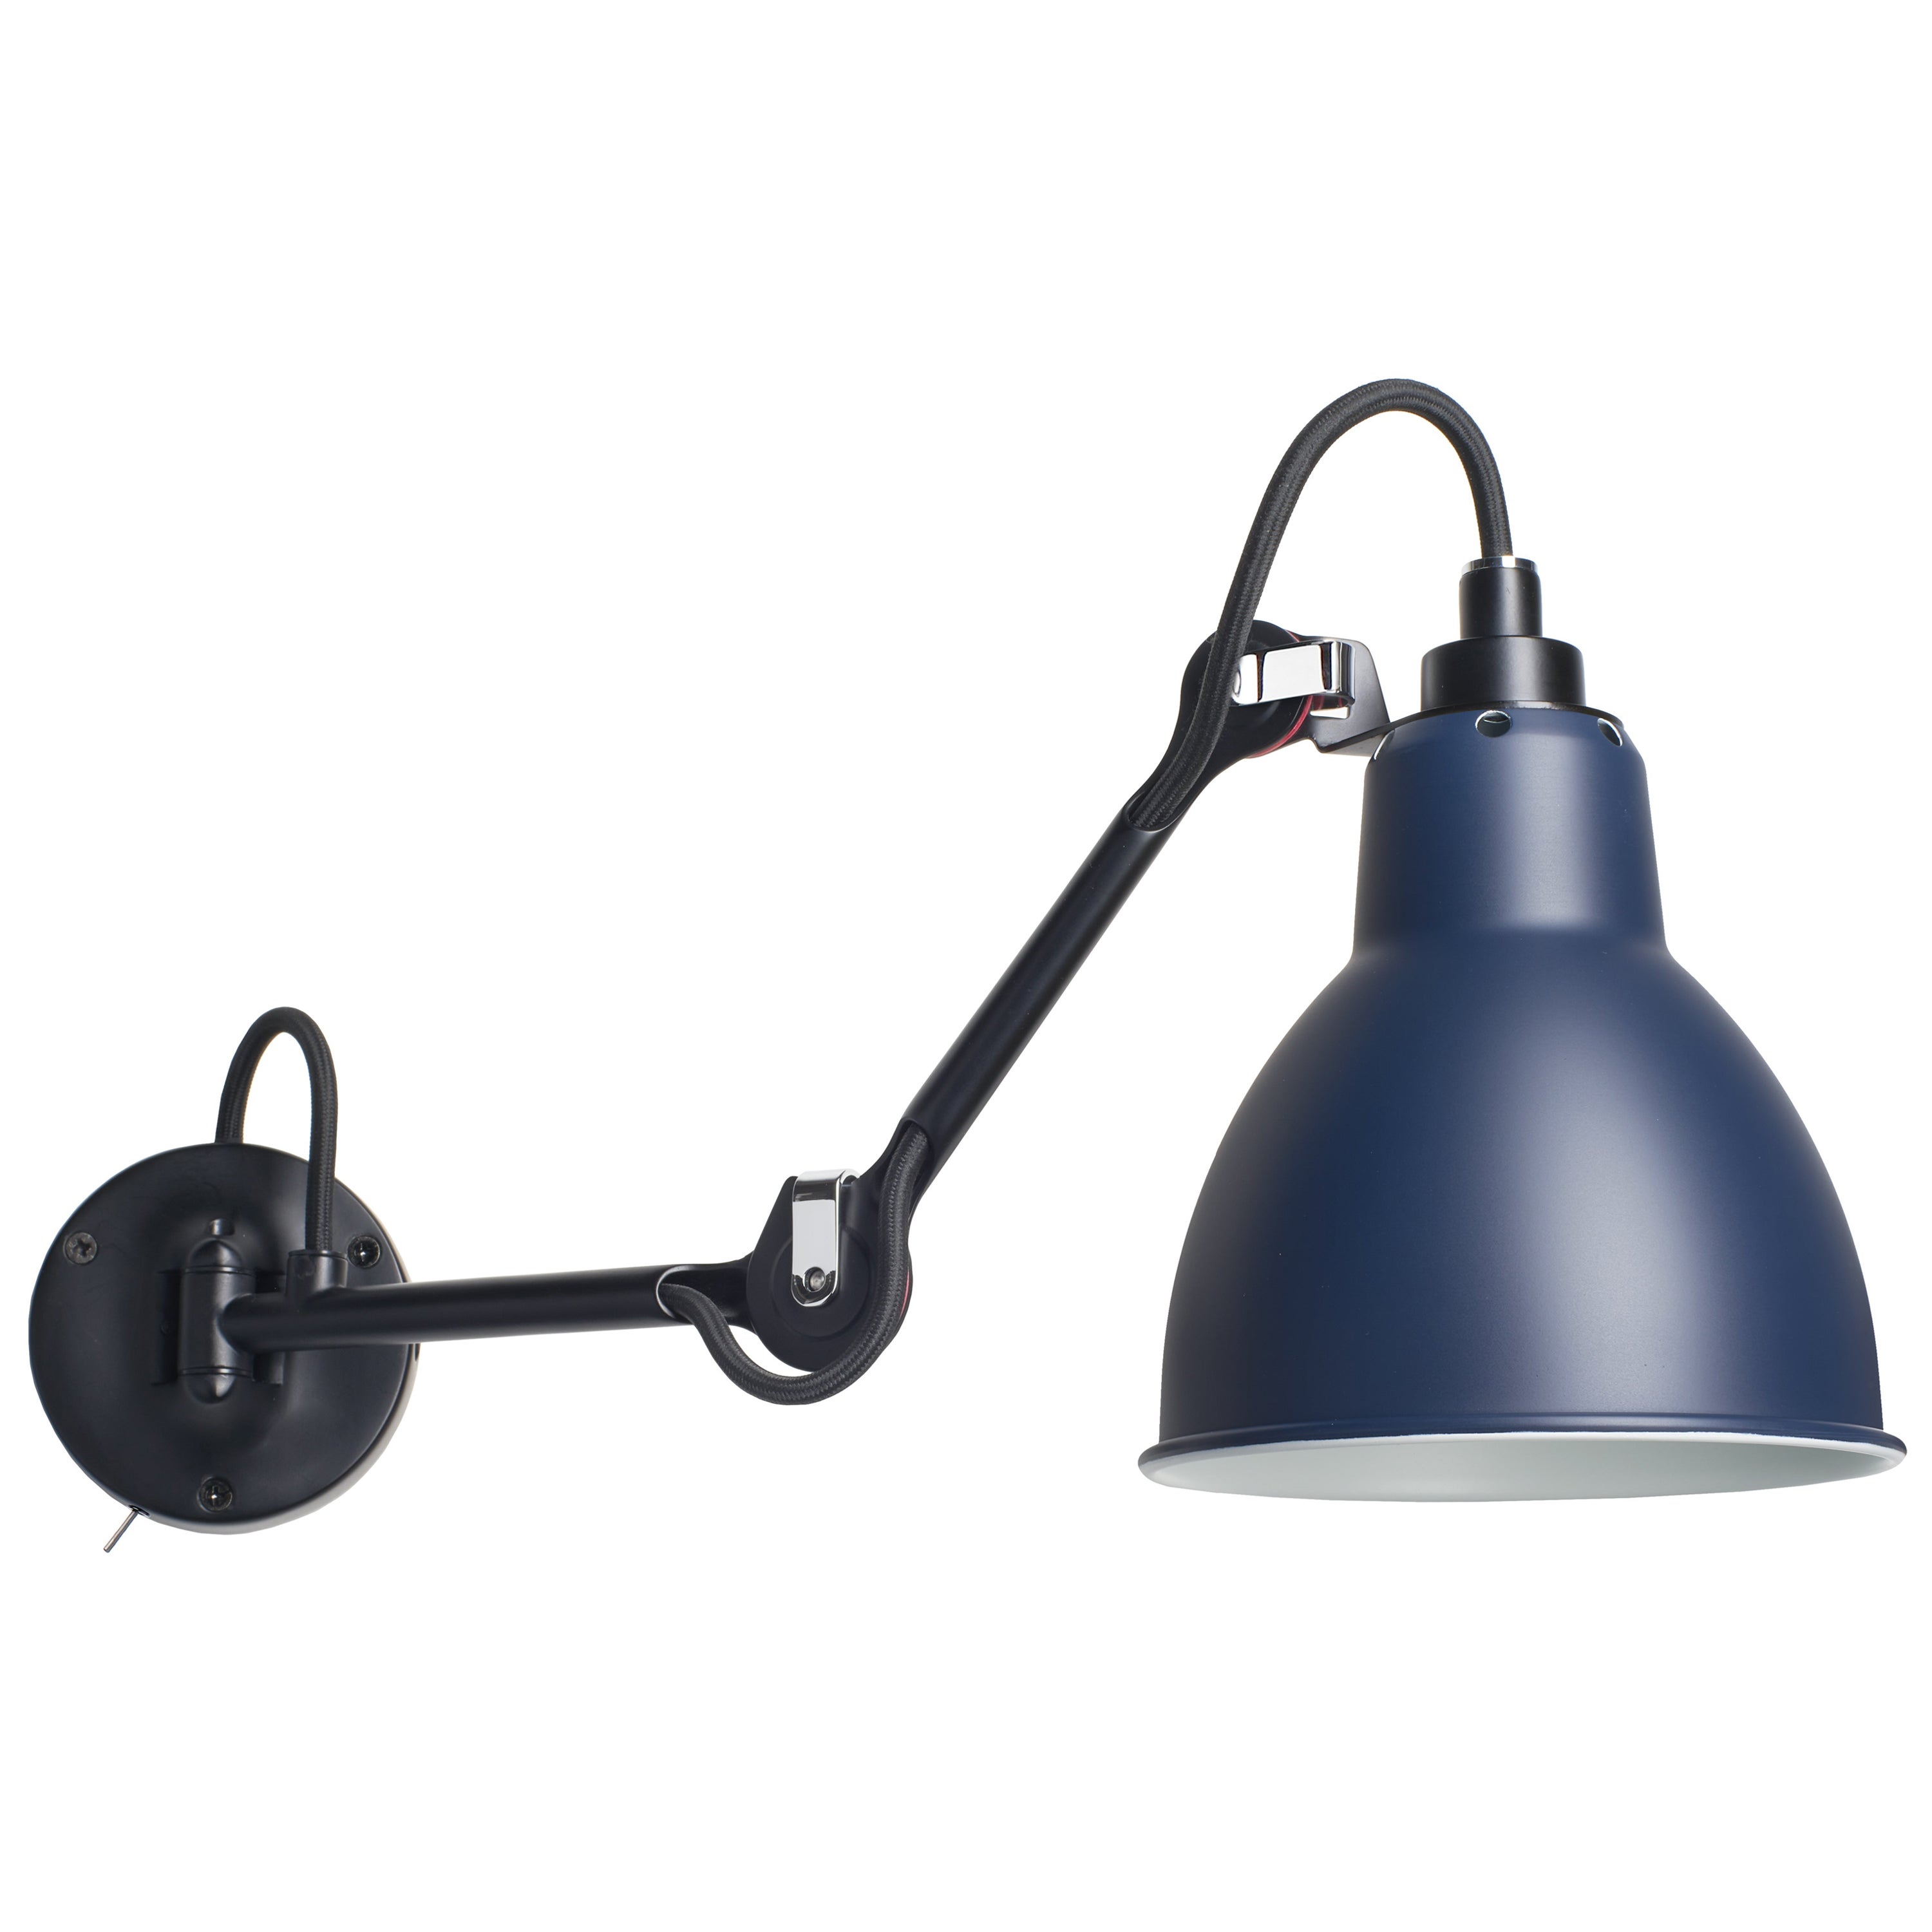 DCW Editions La Lampe Gras N°204 SW Wall Lamp in Black Steel Arm and Blue Shade For Sale